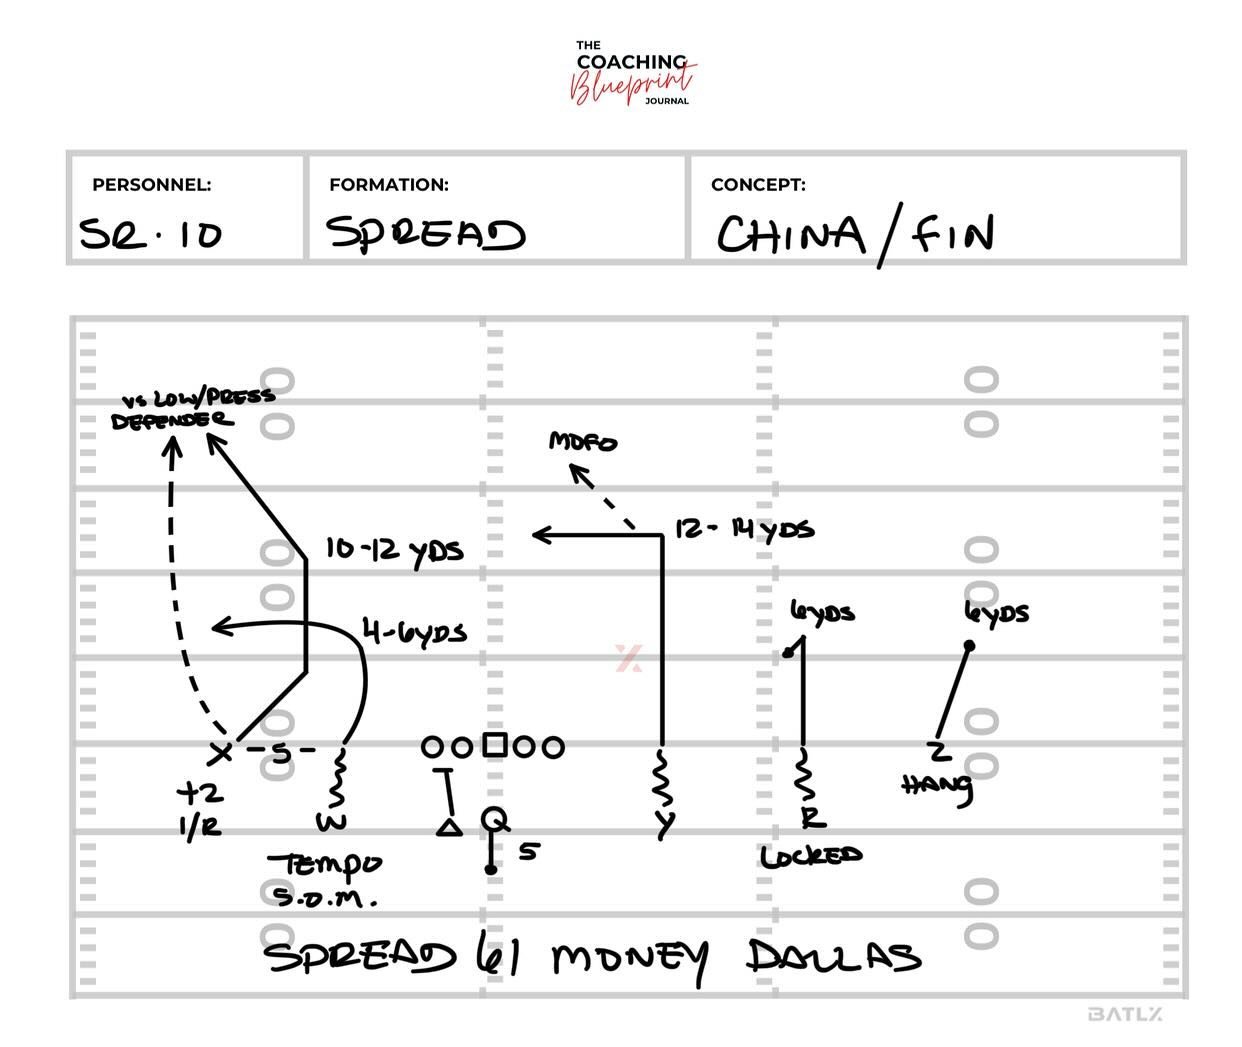 @calstampeders and @jakemaier_15 doing magic 🎯 AGAIN&hellip; this time layering CHINA complimented by a variation of FIN. 

This is Canadian Football - Full Circle Football 

#cfl #canadianfootball #coachingblueprint #footballeducation #concepts #la